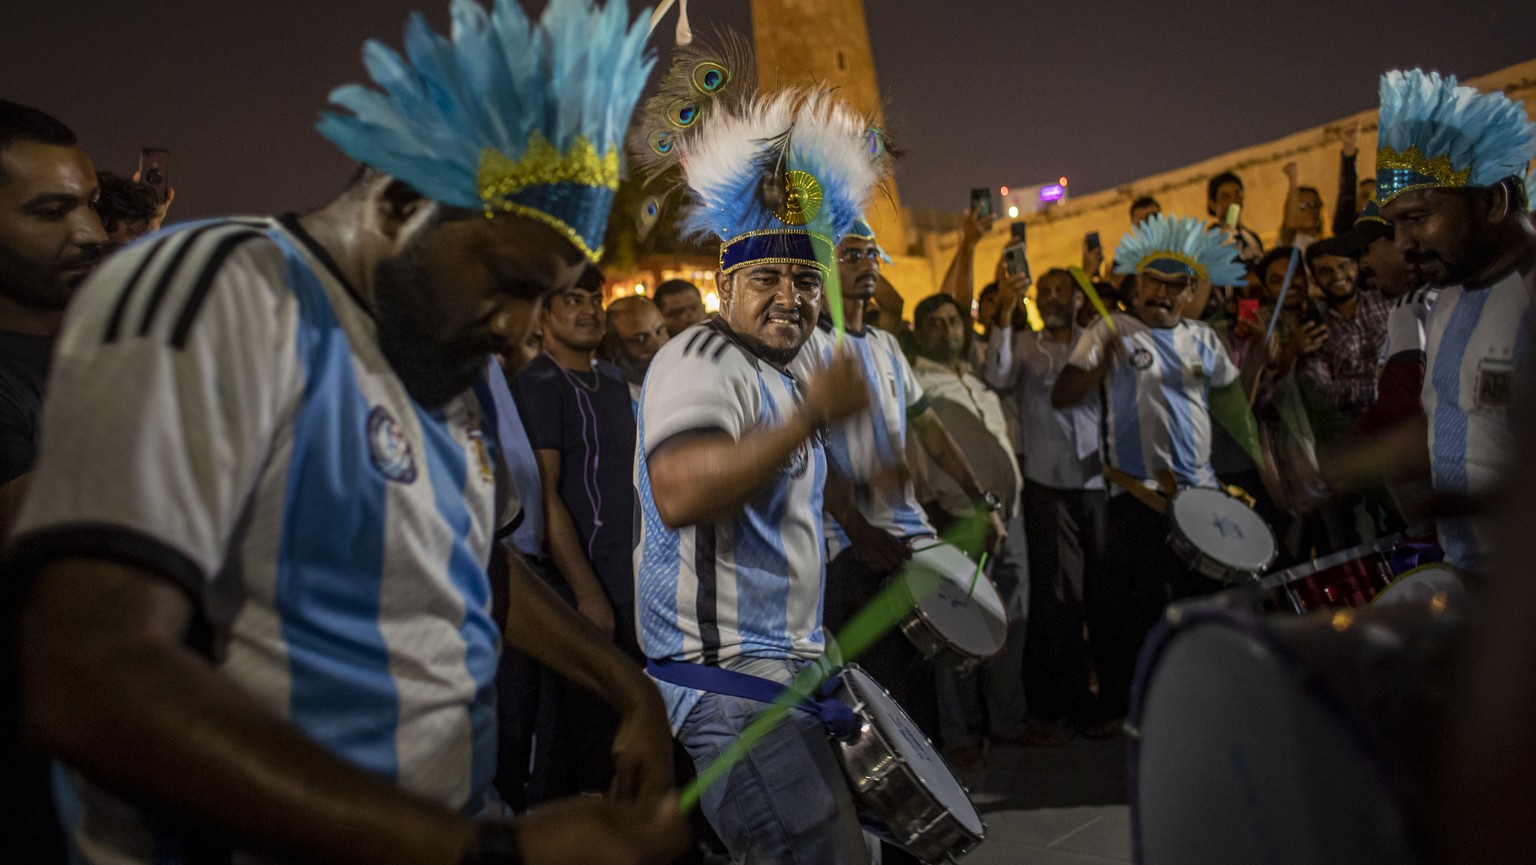 epa10306057 Argentinian fans drum roll at the Souq Waqif market area in Doha, Qatar, late 14 November 2022. The FIFA World Cup Qatar 2022 will take place from 20 November to 18 December 2022 in Qatar. ...